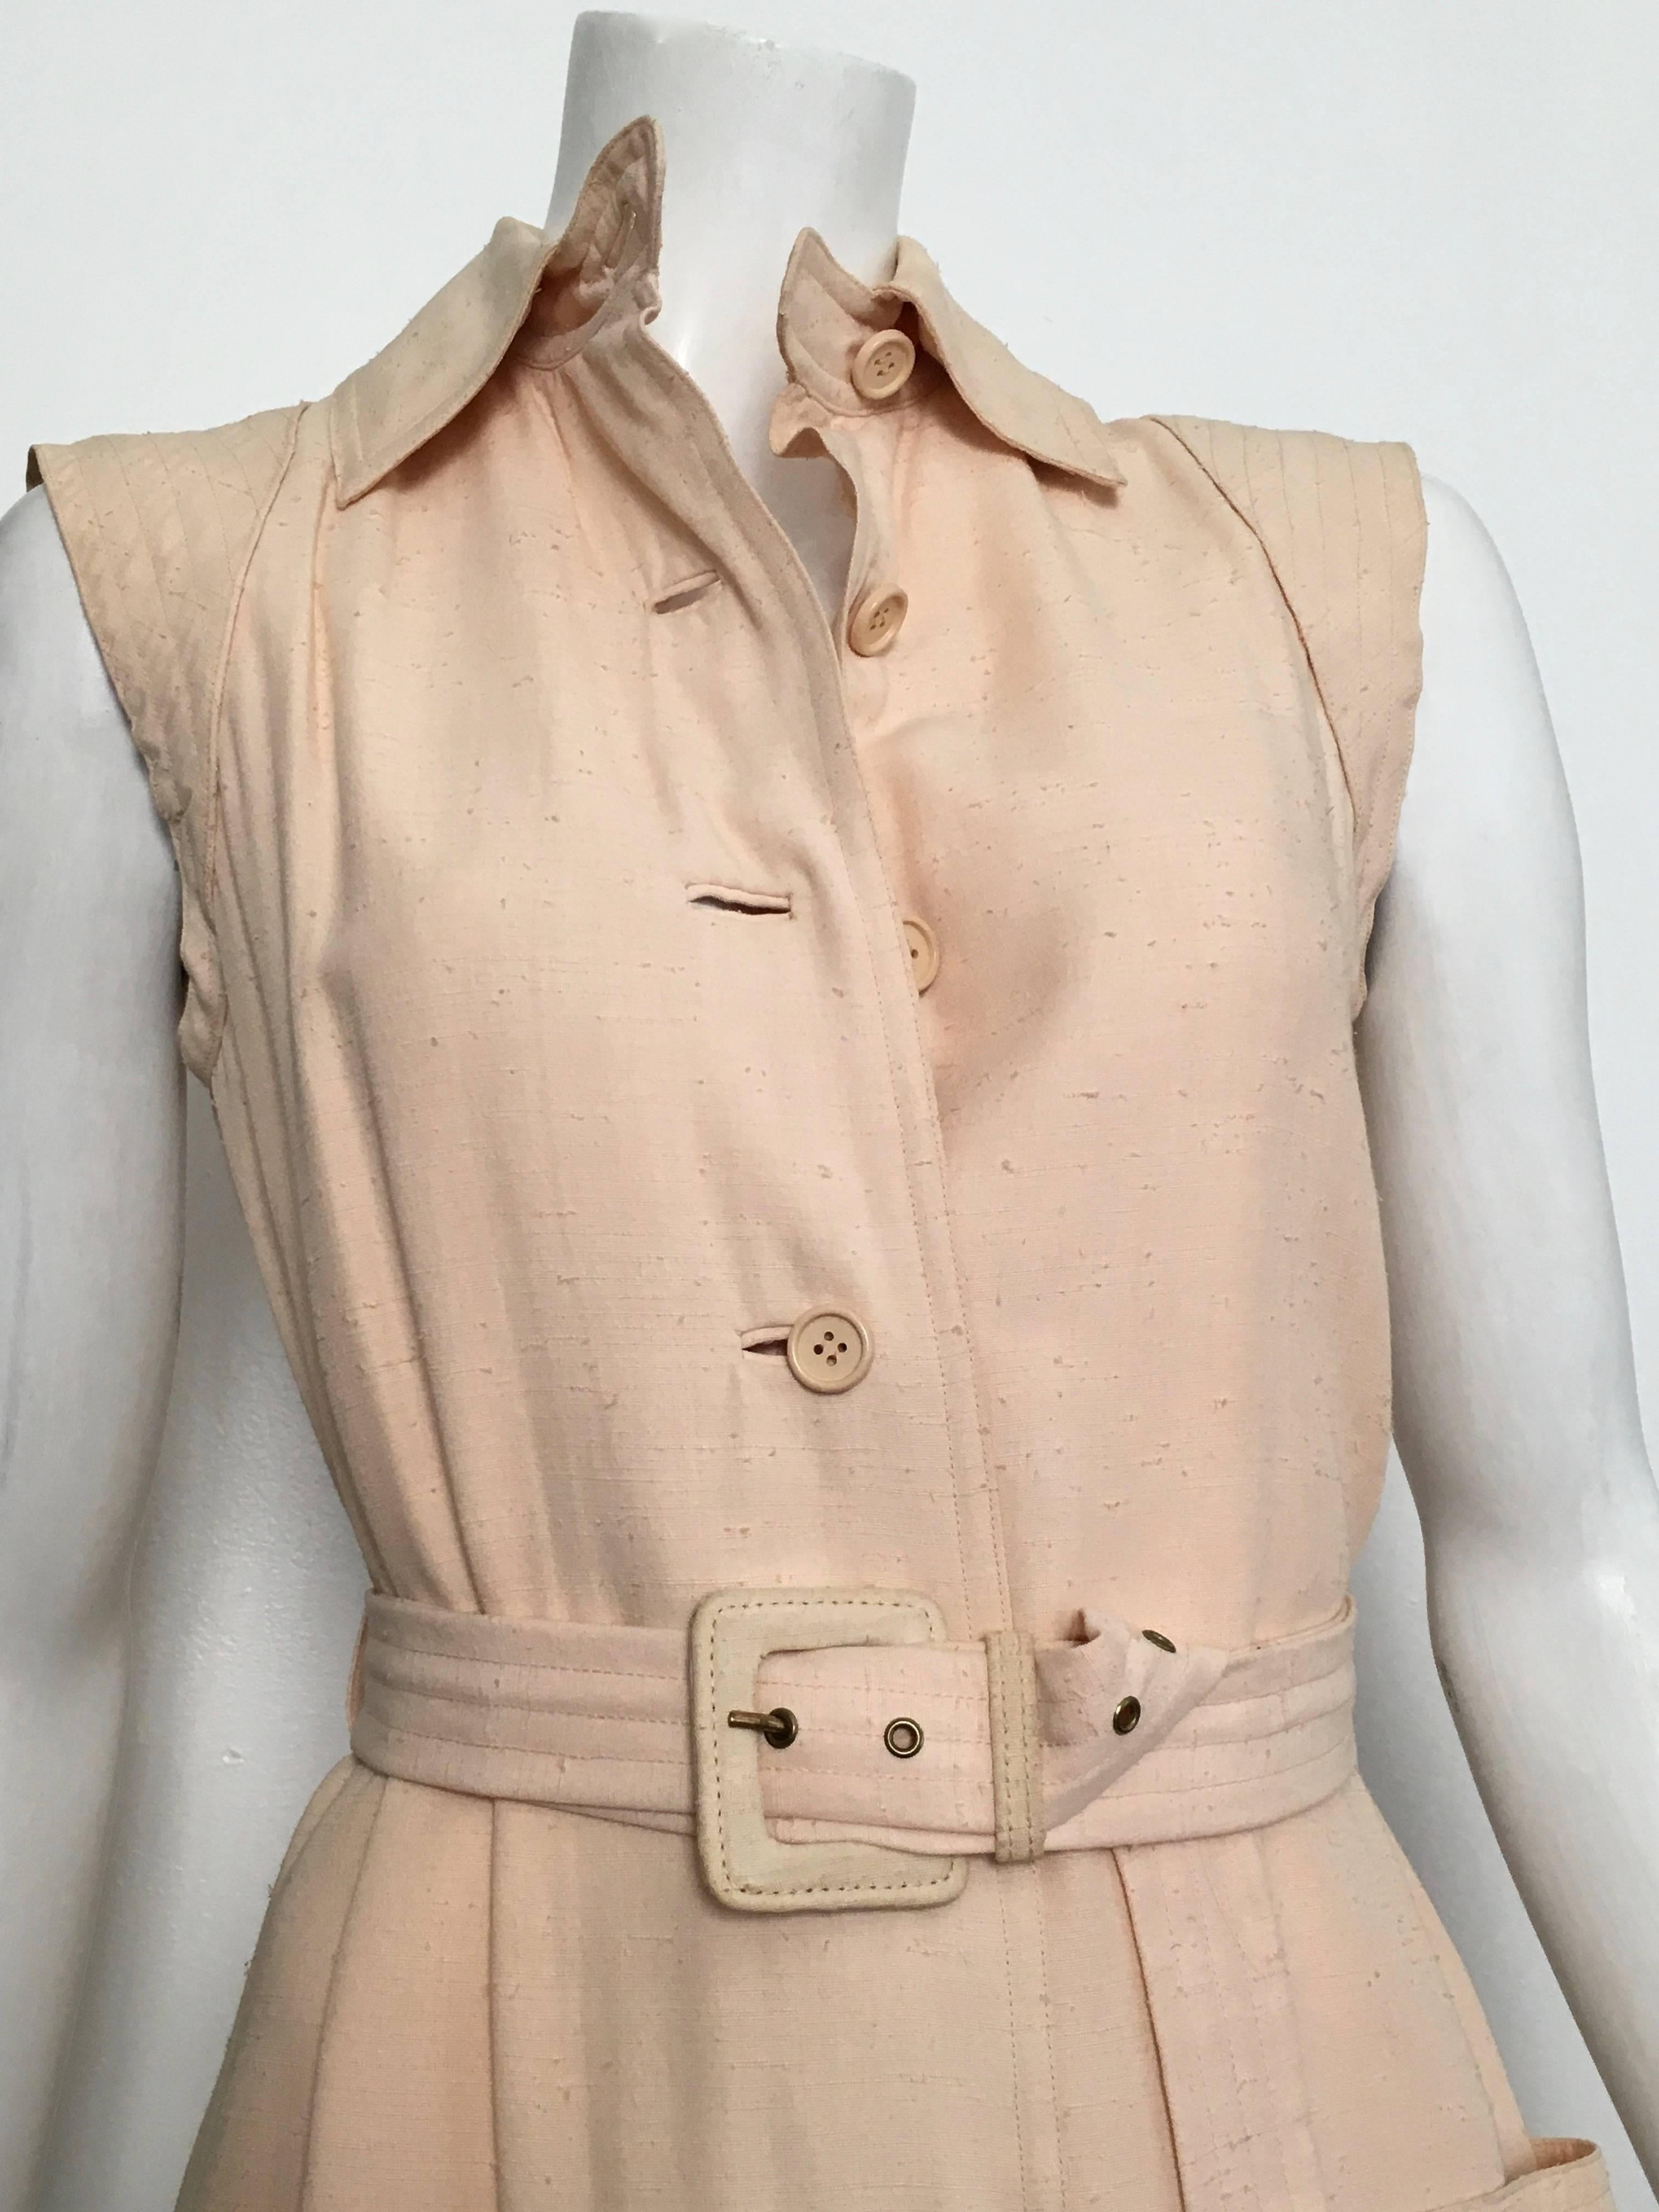 Geoffrey Beene for Neiman Marcus 1970s peach raw silk fabric button up dress with belt is a USA size 8. Ladies please use your measuring tape so you can properly measure your bust, waist & hips to make certain this is what Geoffrey would approve of.